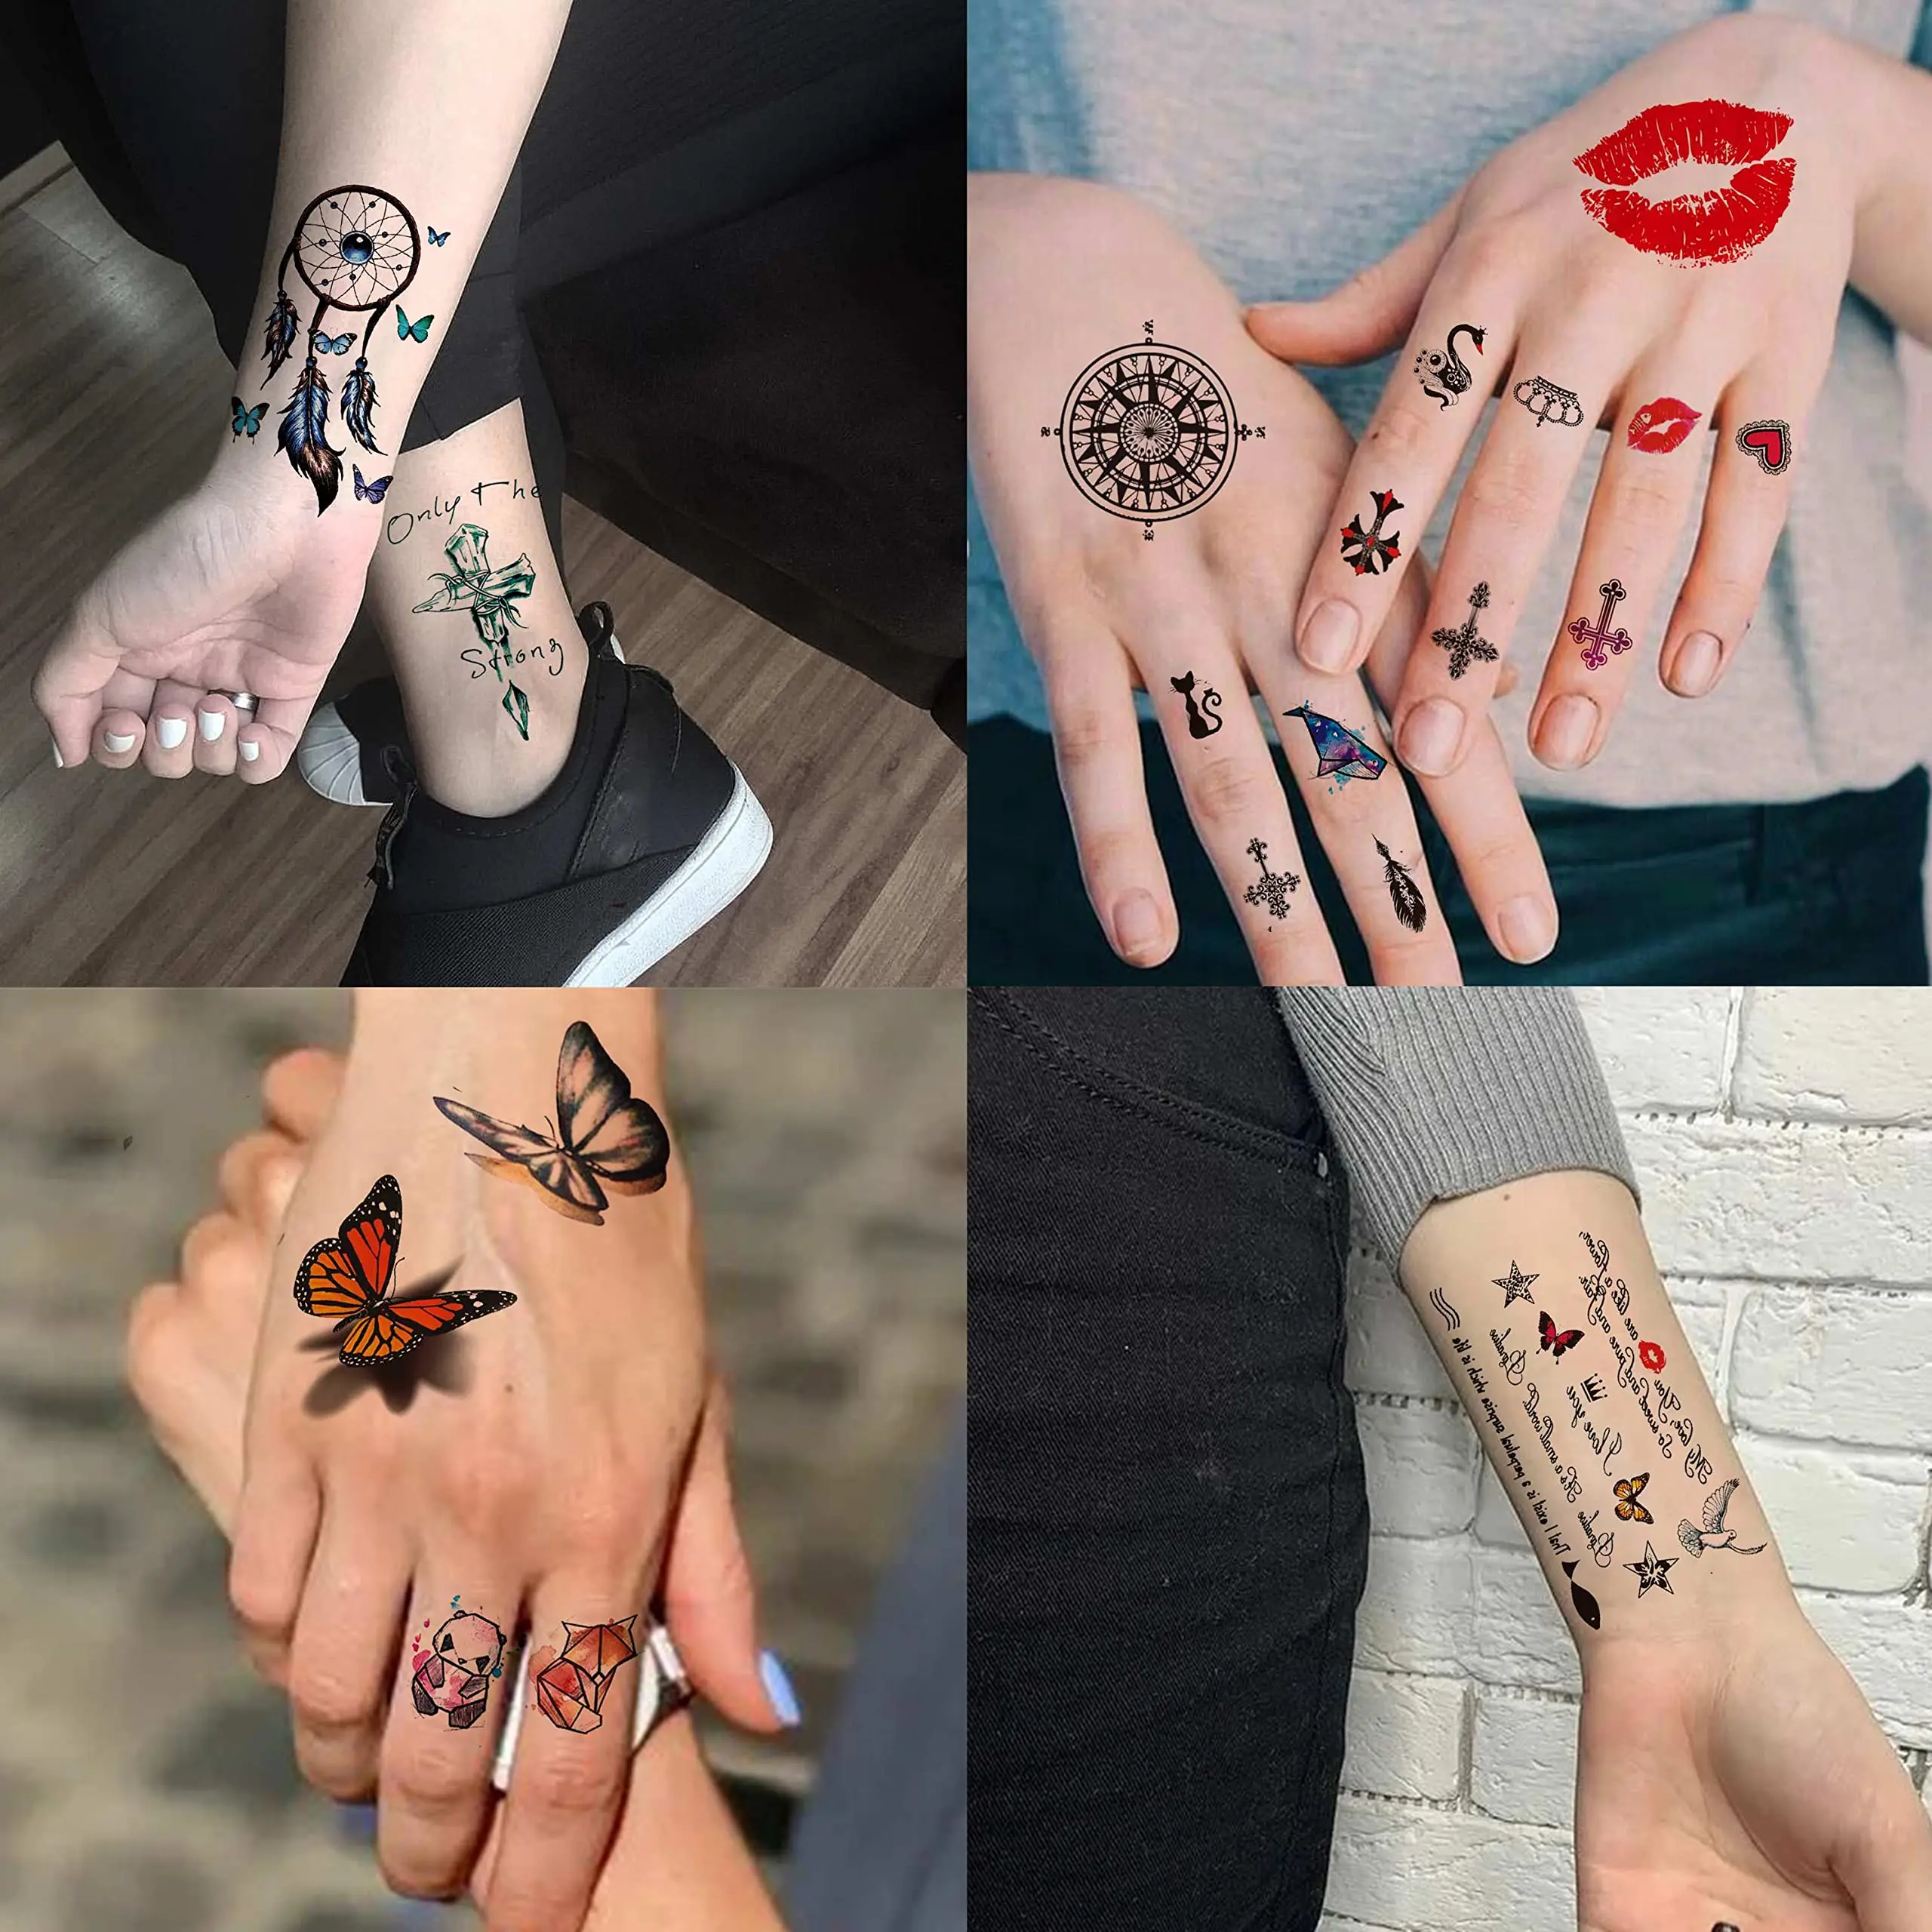 Red-brown Henna Tattoo Stickers Temporary Tattoos for Women Mandala Mehndi  Stickers for Hand Women's Body Protection Fake Tattoo - AliExpress